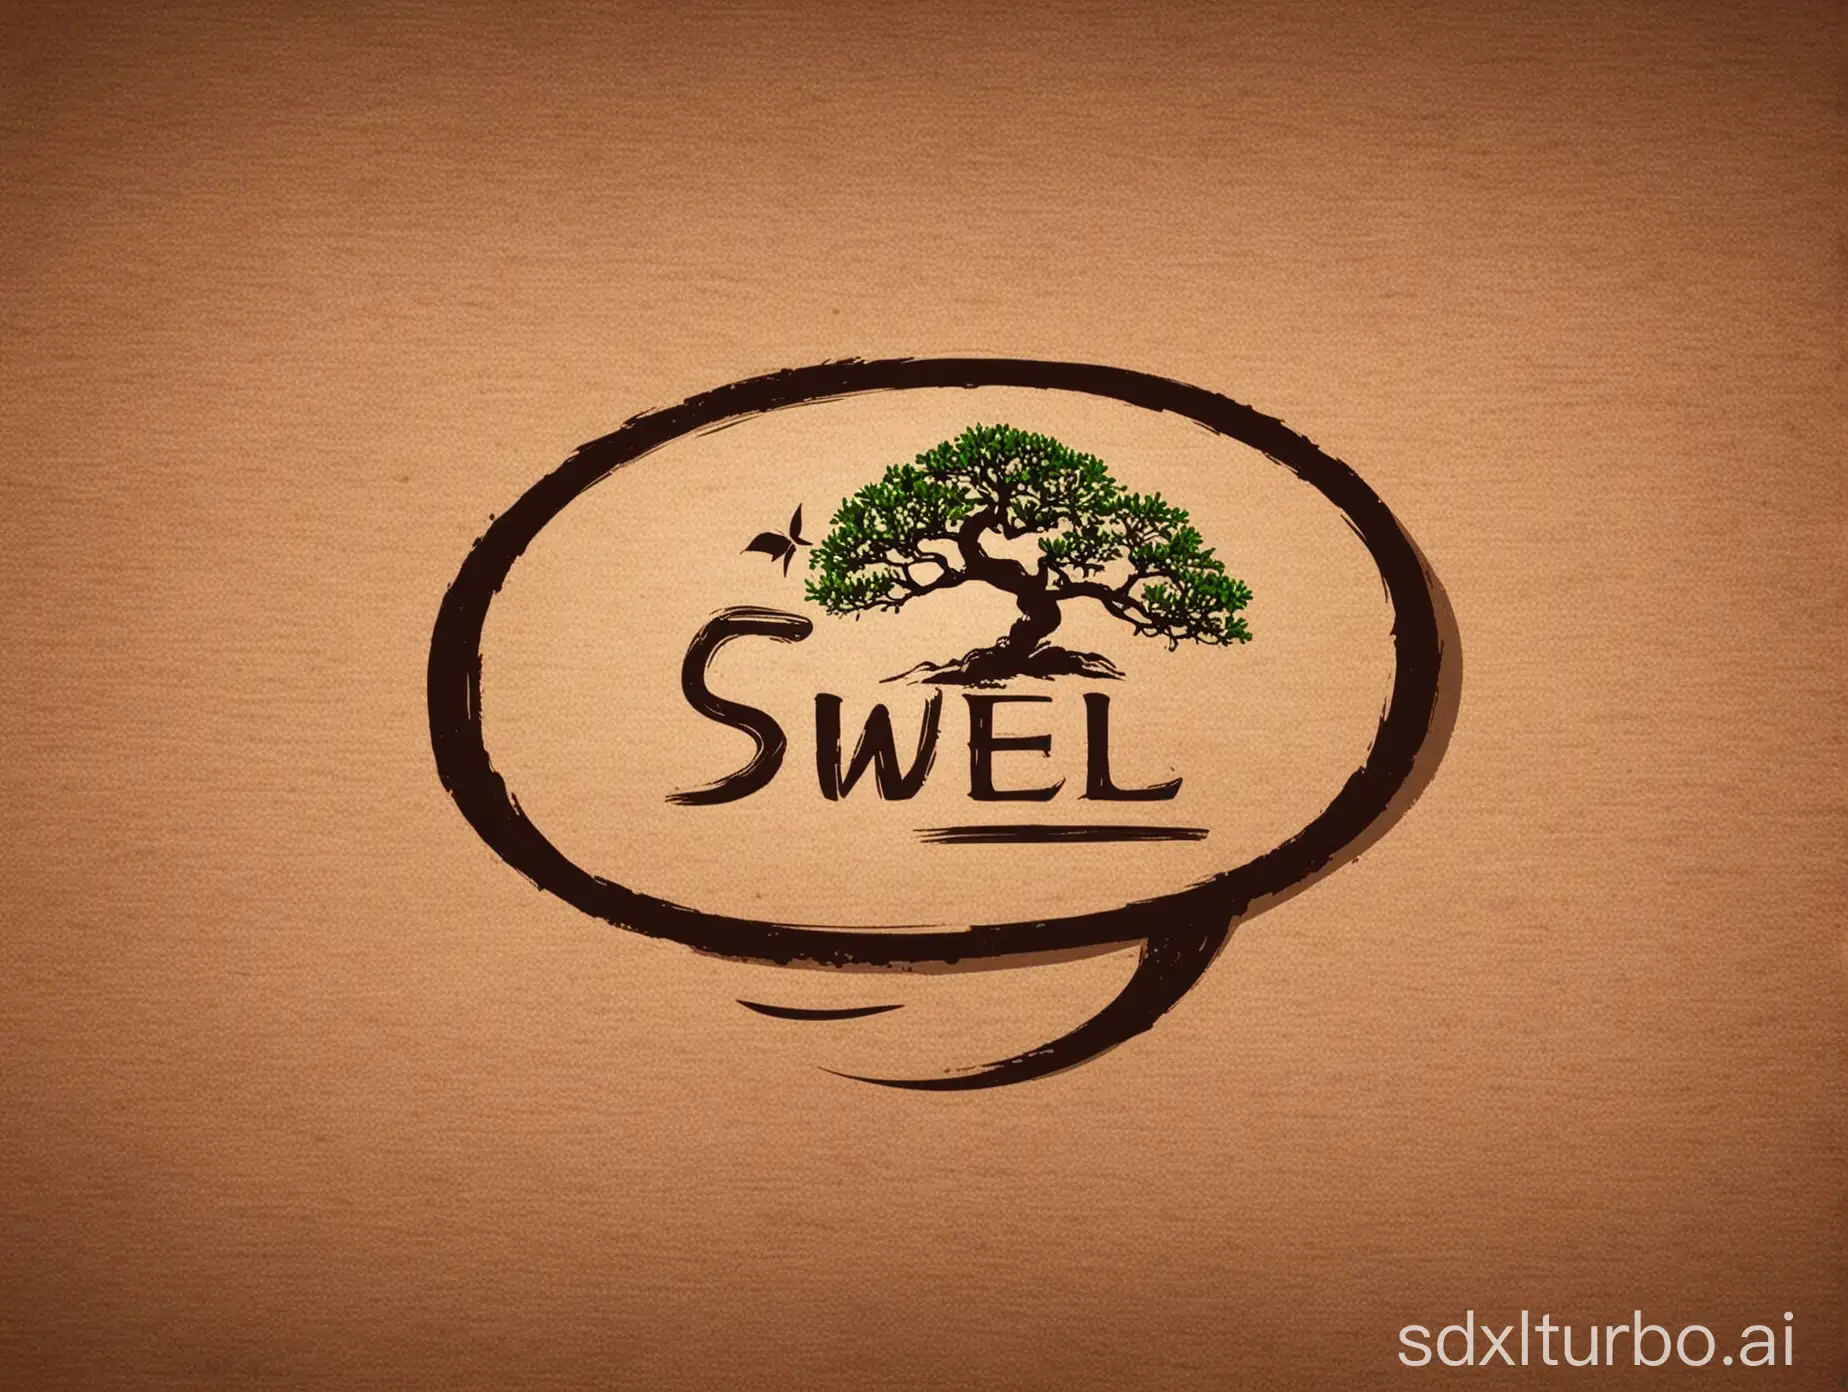 Design a logo for "ESWELL", this logo is mainly used for outdoor sports equipment and bonsai pots.